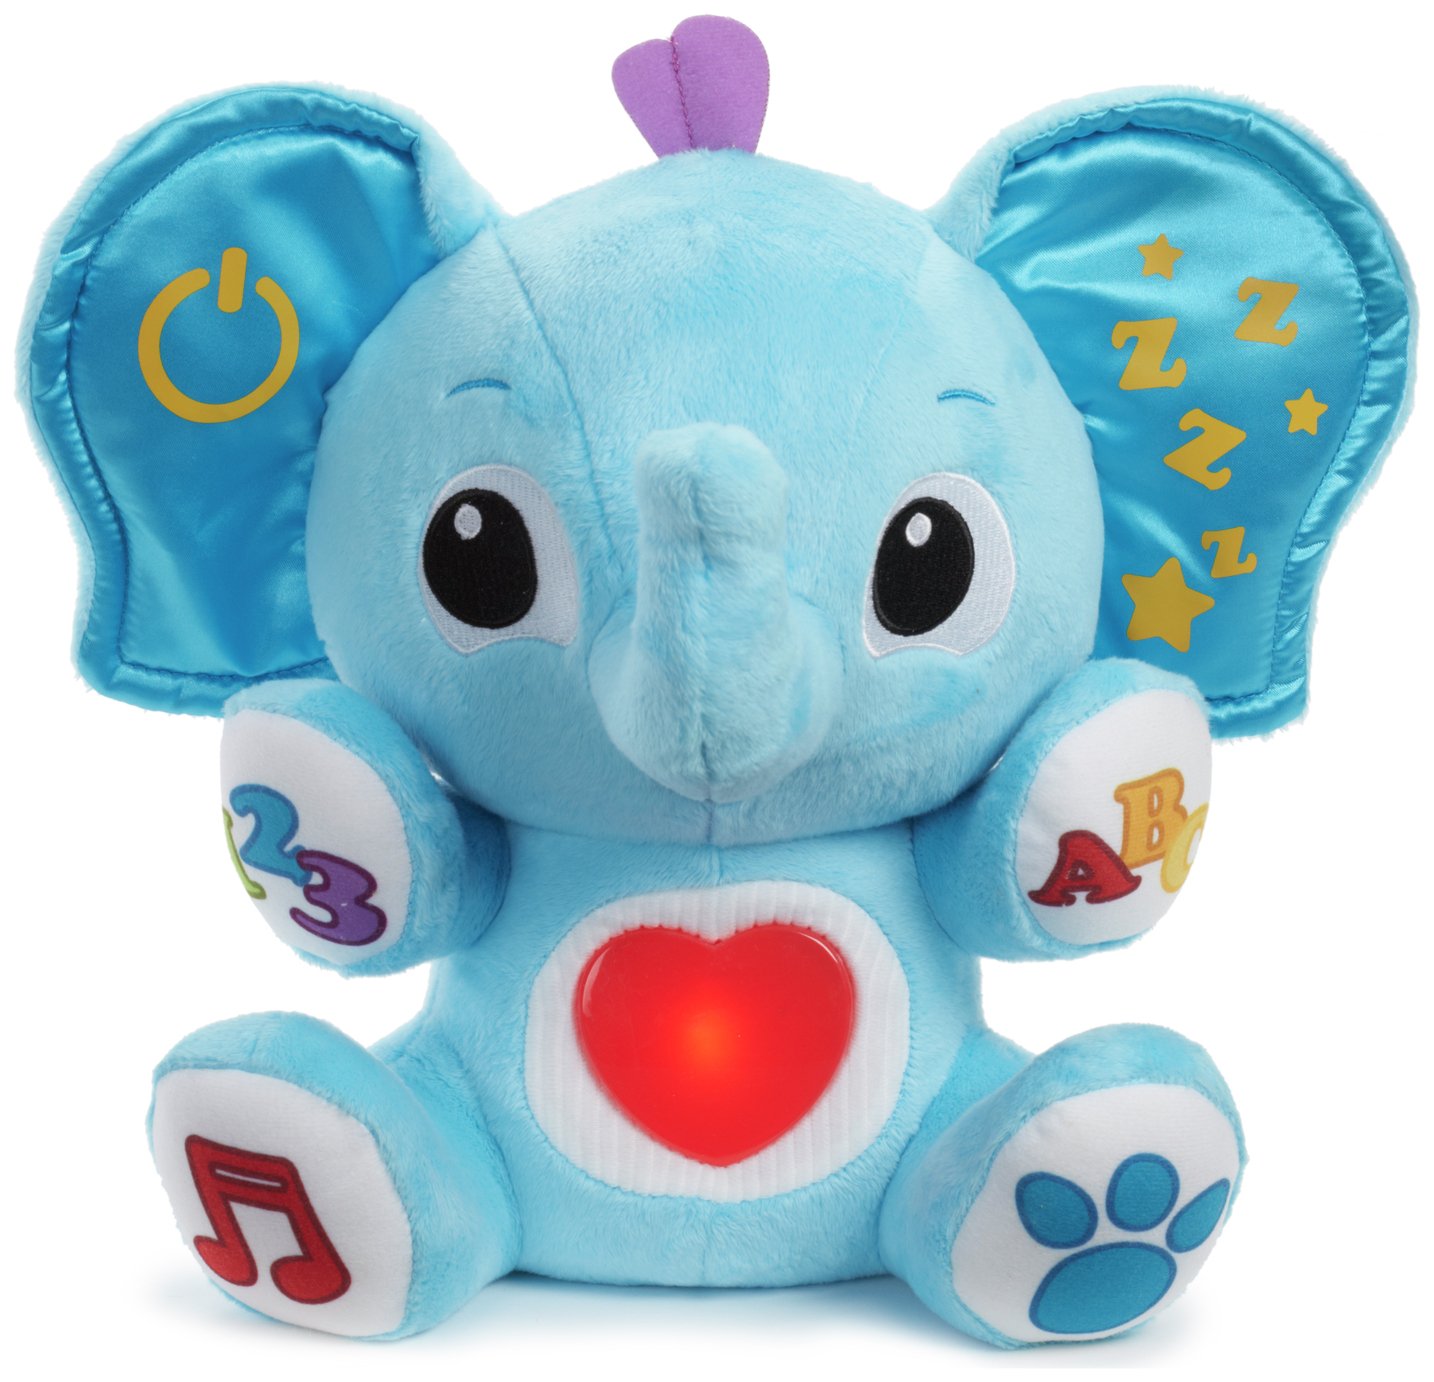 Little Tikes My Buddy Trumphant Review